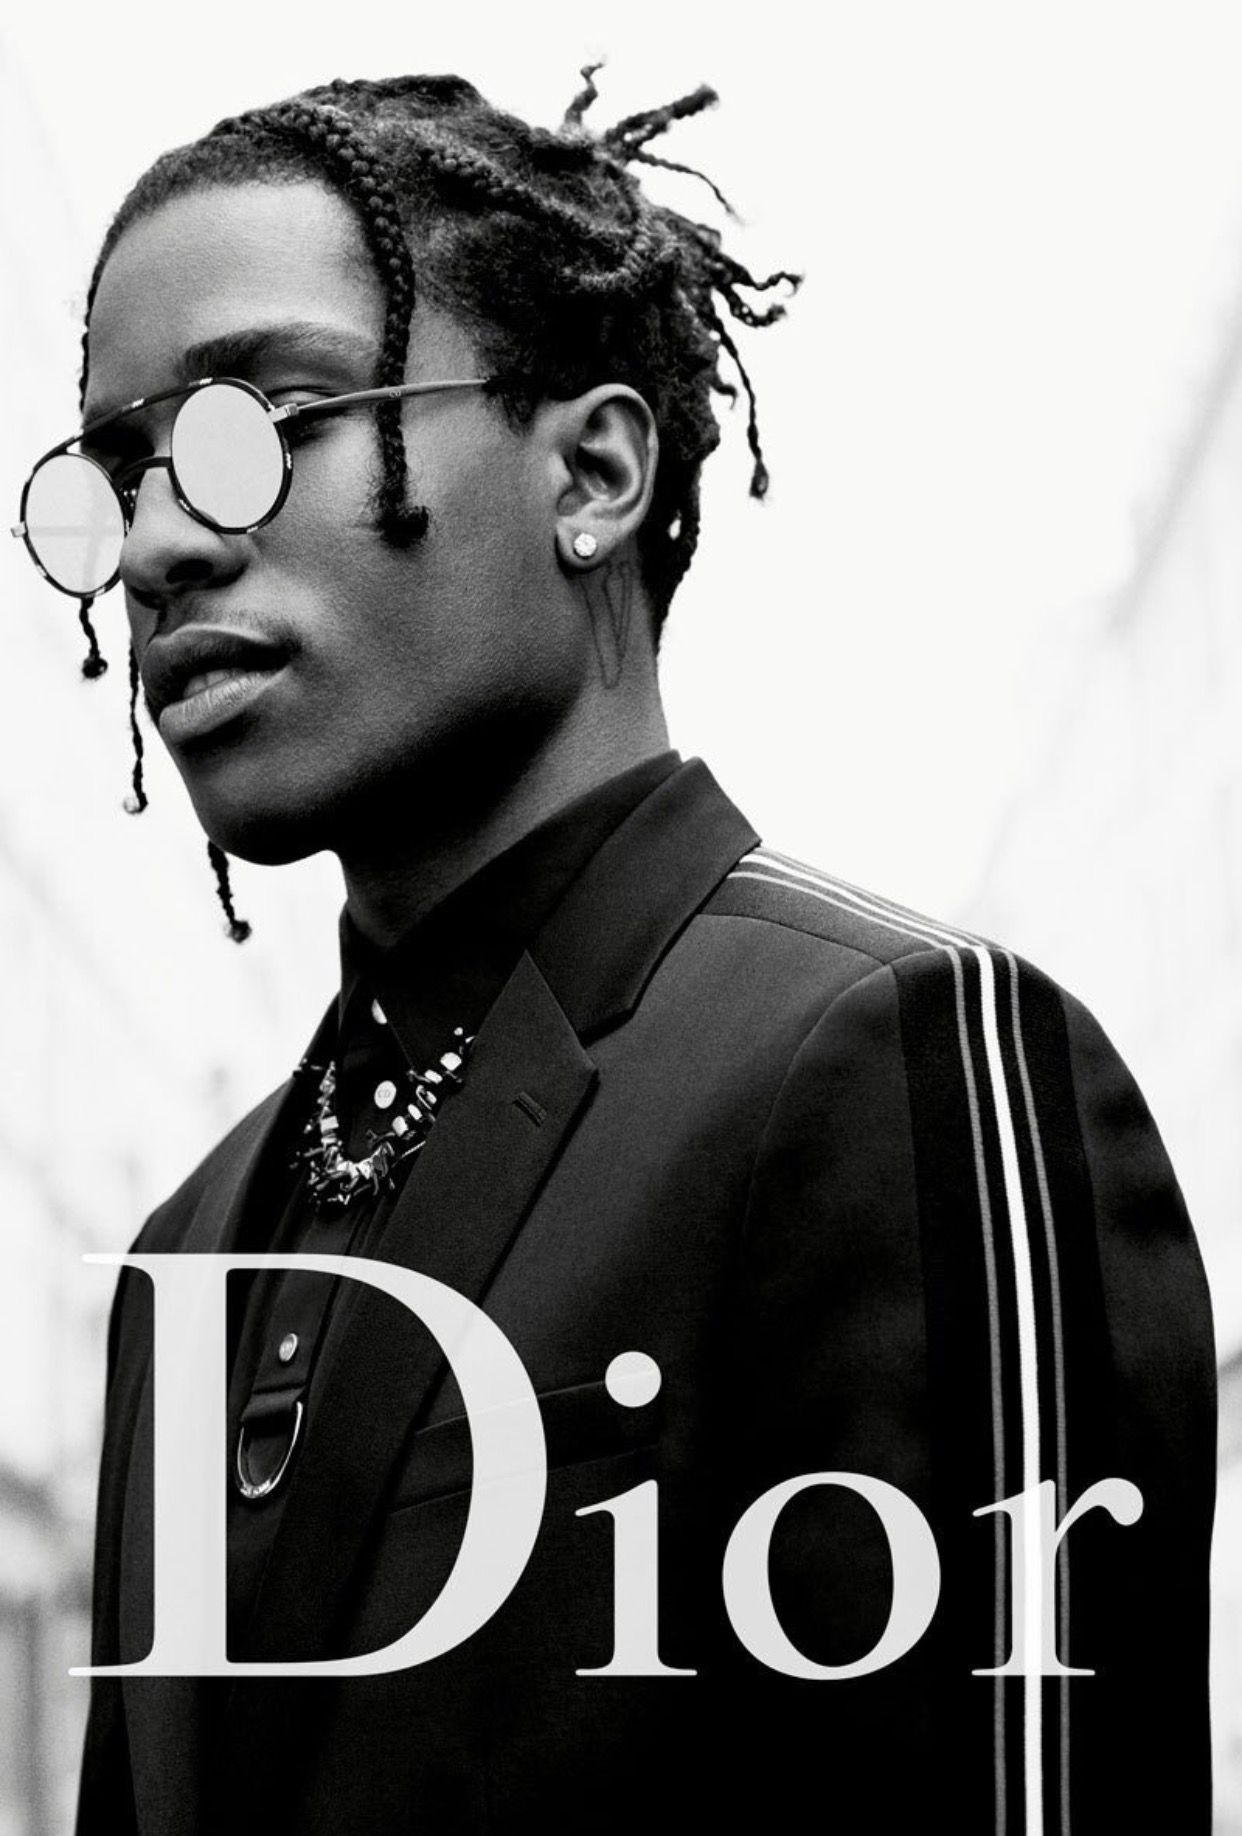 asap rocky iphone wallpaper,eyewear,hairstyle,album cover,glasses,music